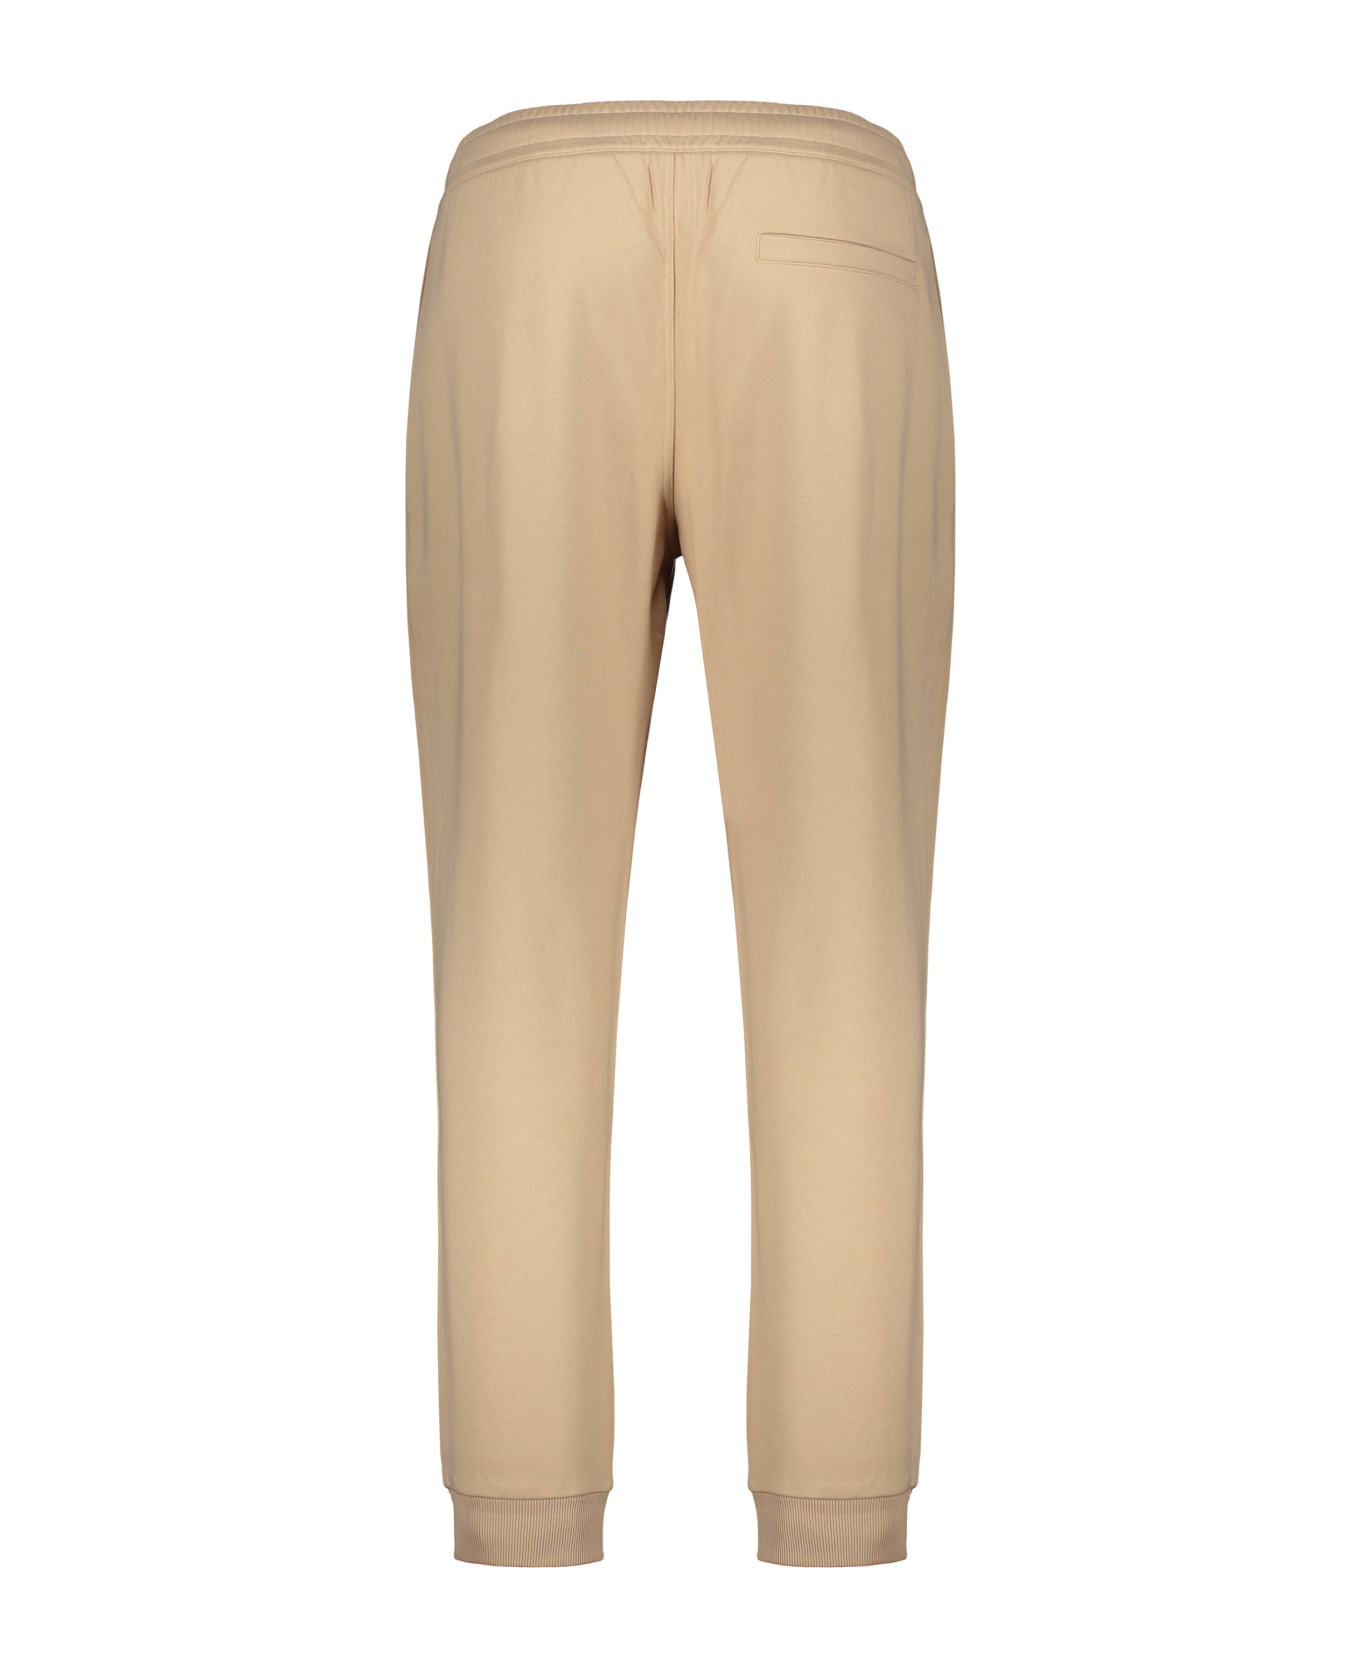 Burberry Cotton Track-pants - Beige ボトムス